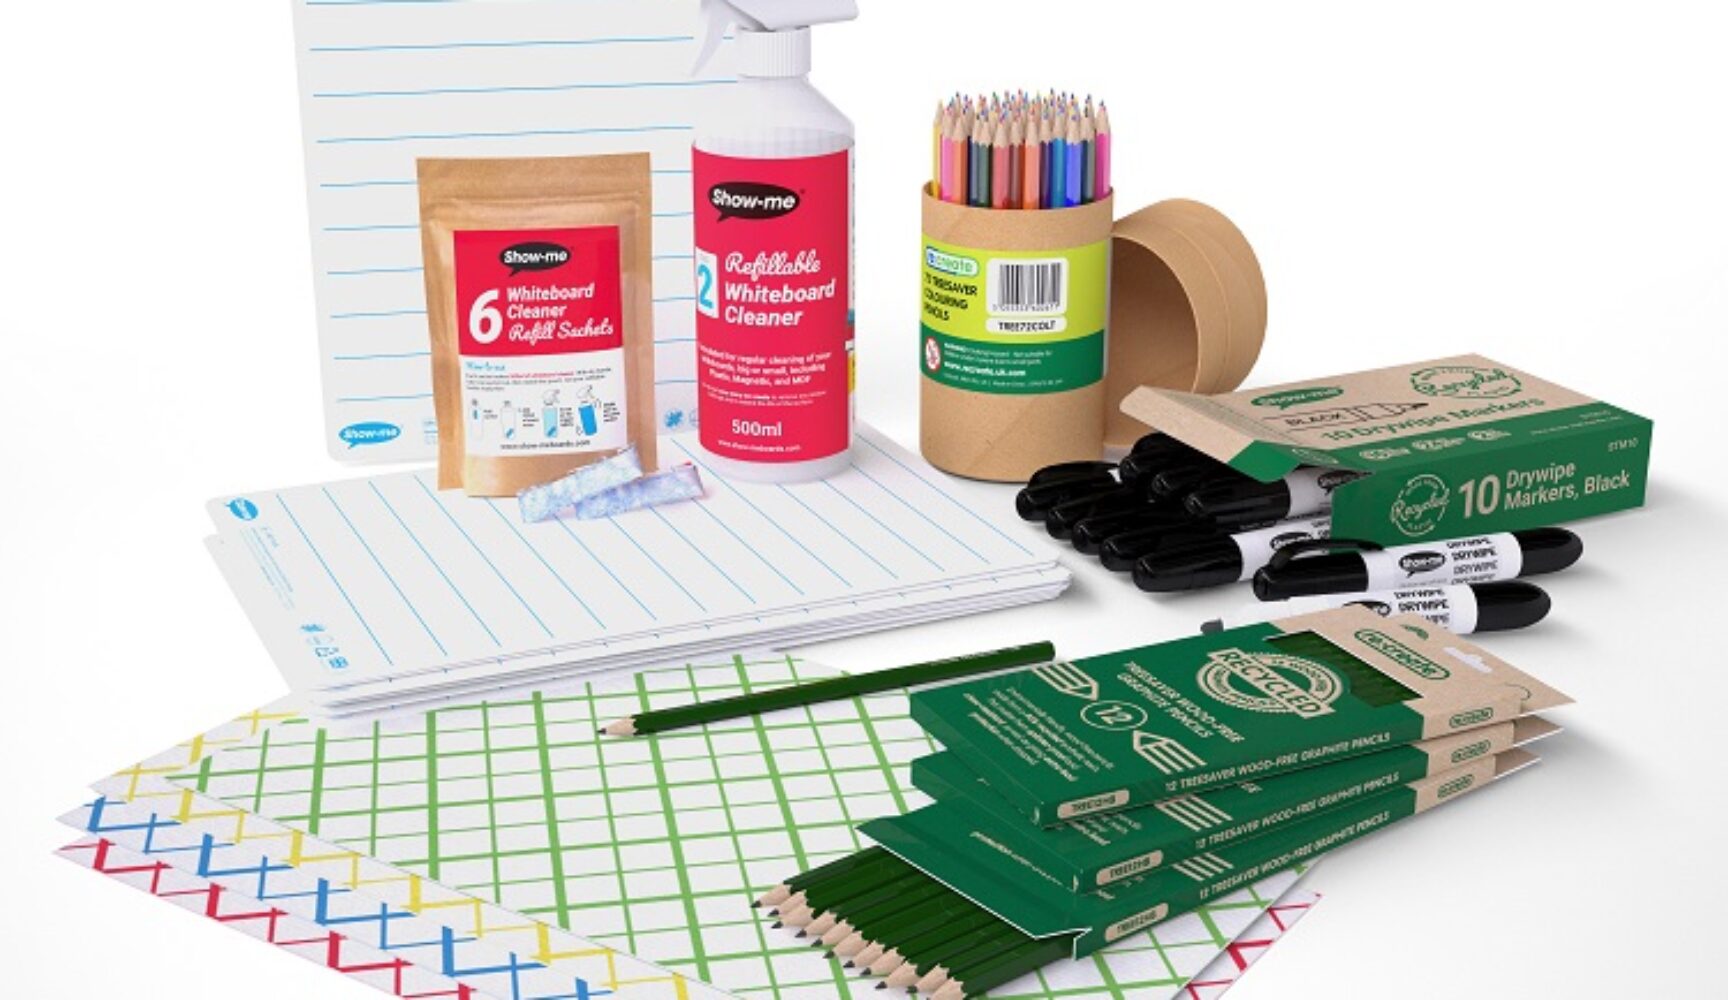 Image of stationery bundle including pens, white boards, cleaner, cloths and pencils